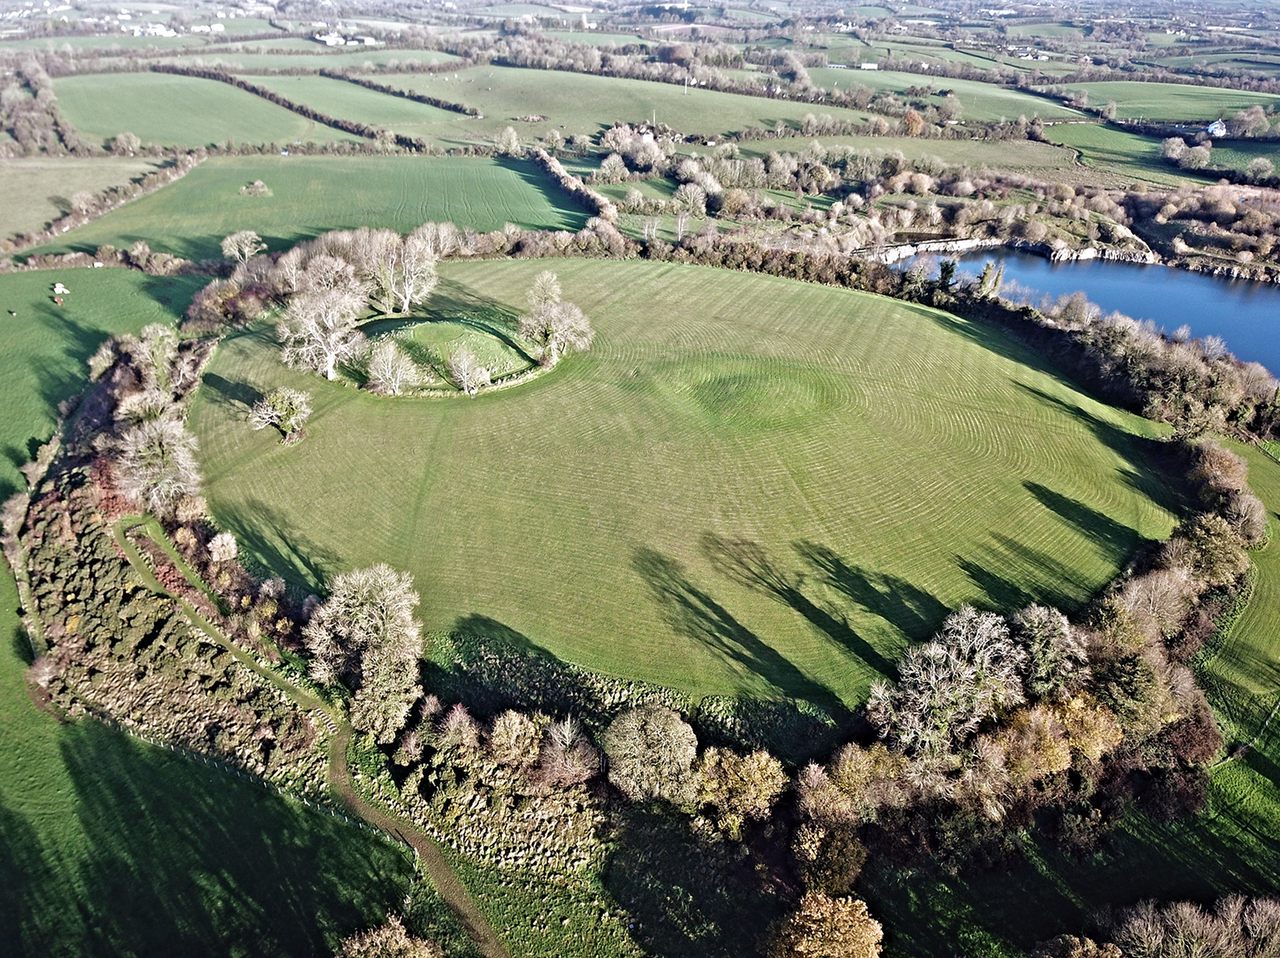 The hilltop remains of Navan Fort, an Iron Age site that a new paper argues has a broader history than previously thought.